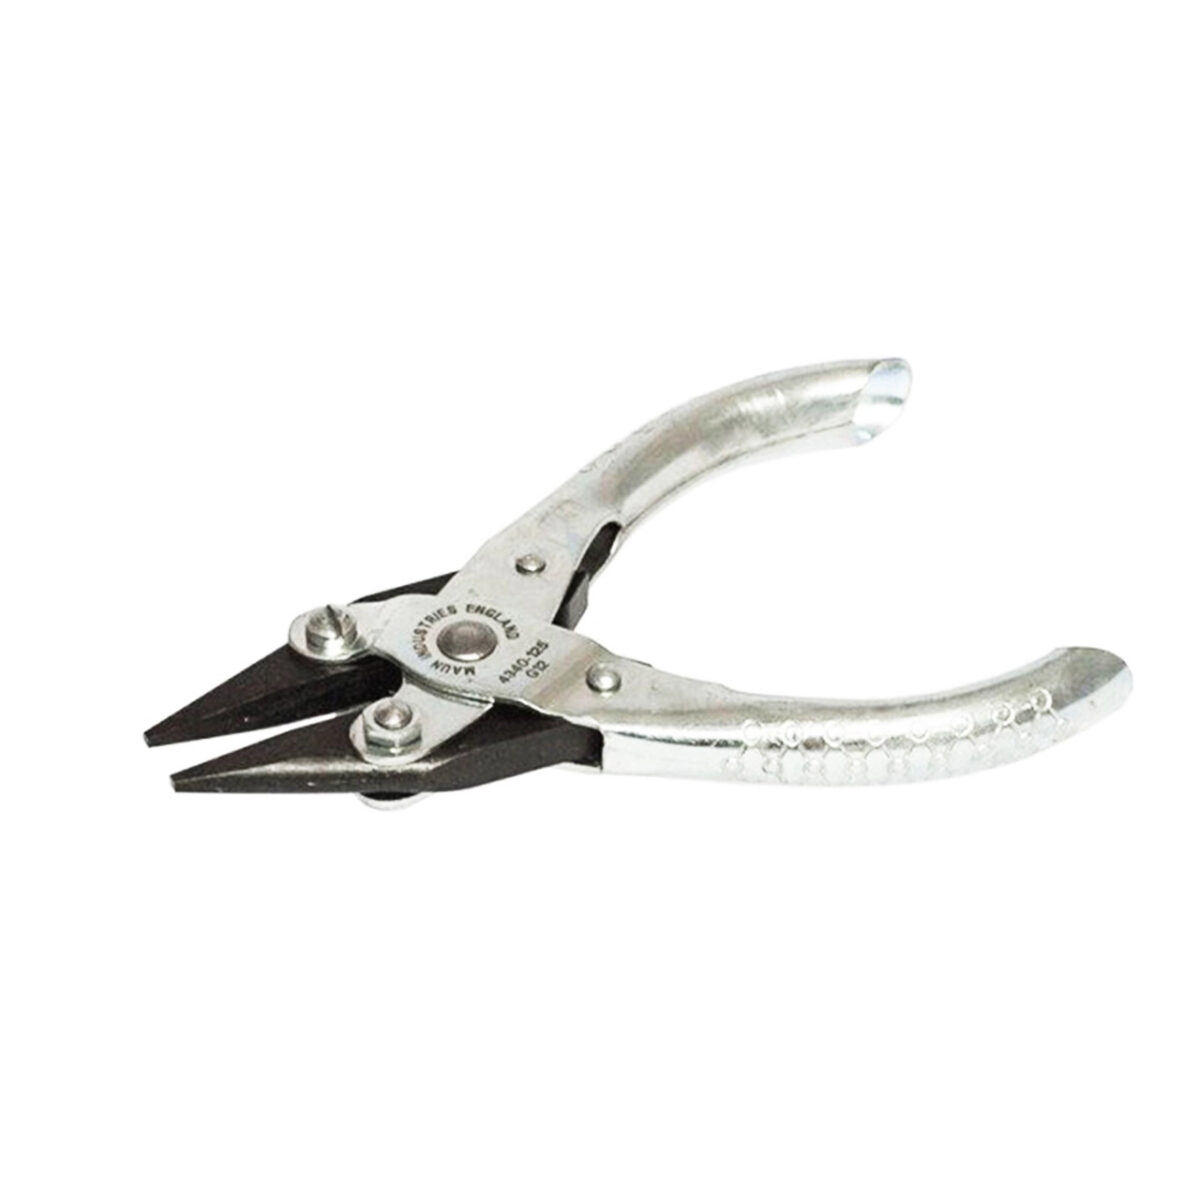 Snipe Nose Smooth Jaws Parallel Plier 125mm Jeweller's Tool Maun 4340-125